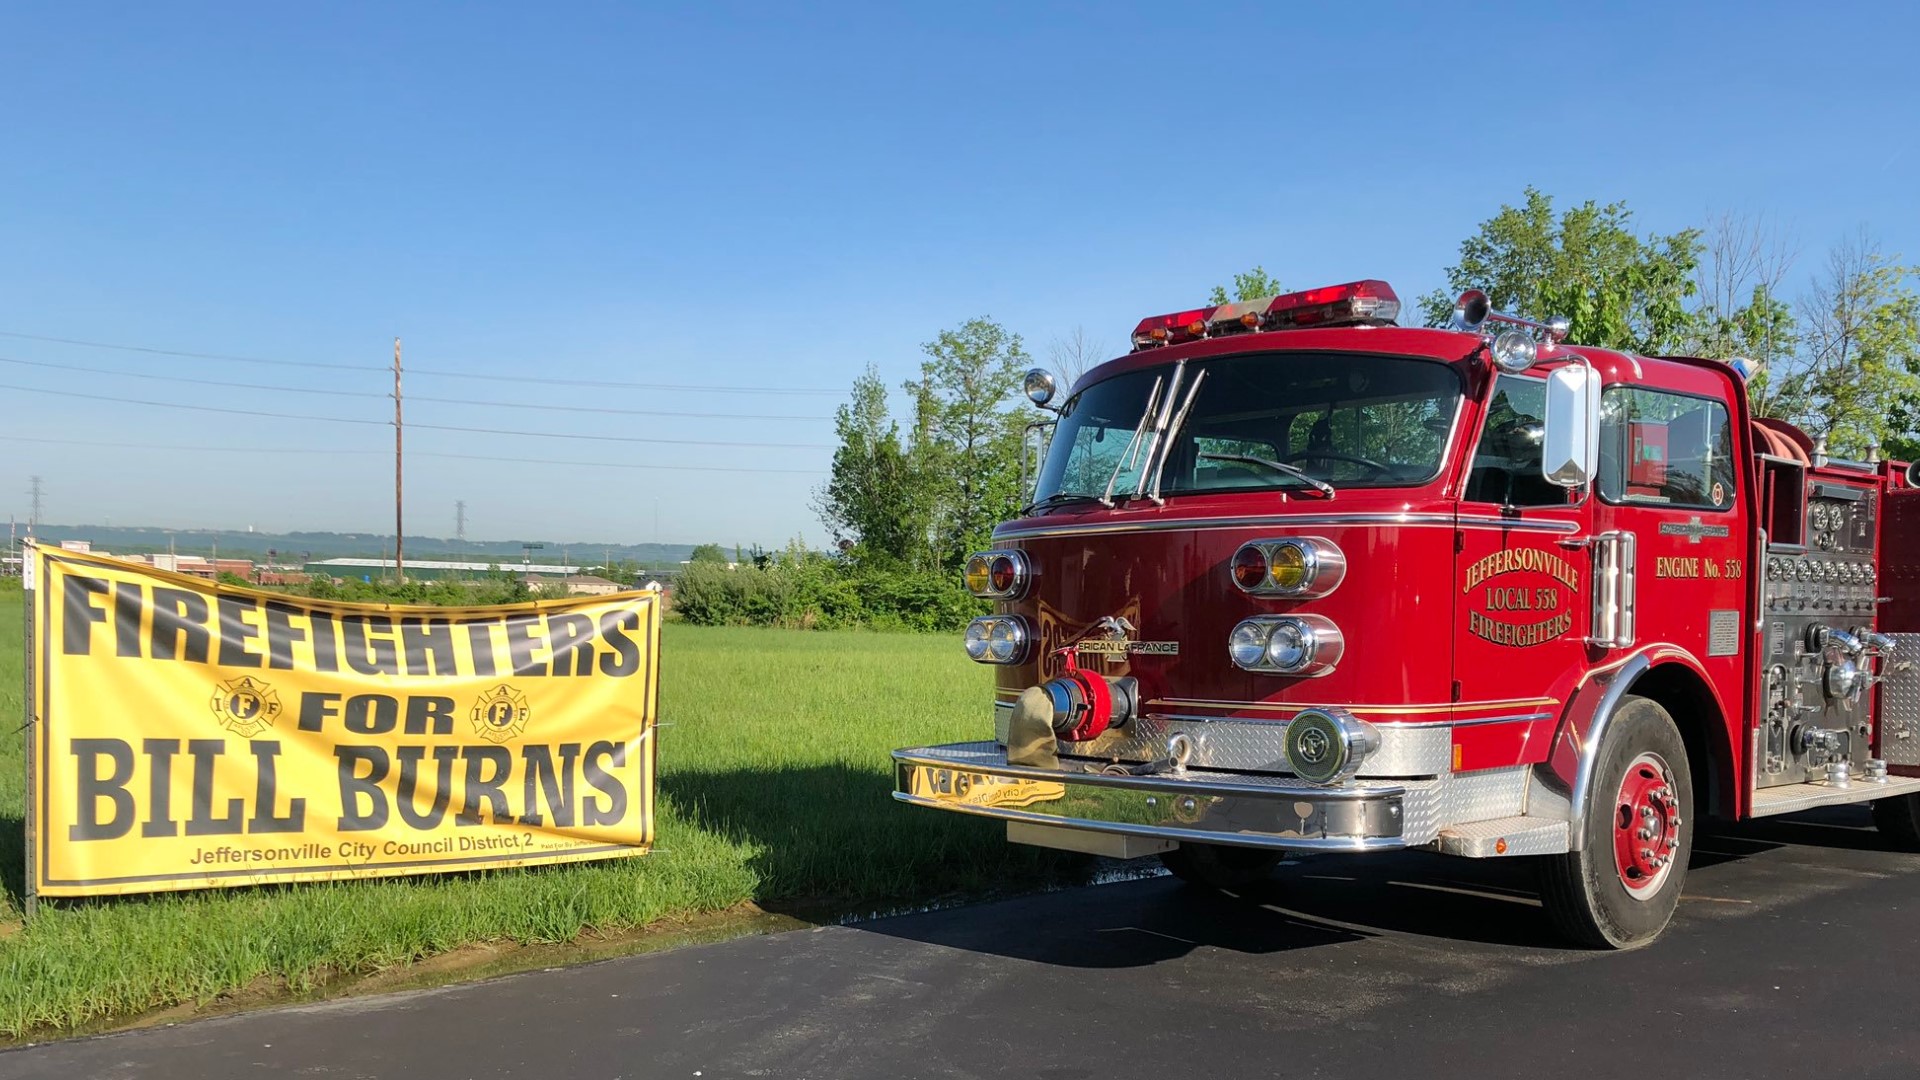 It may look like the Jeffersonville Fire Department is backing a city council candidate, but looks can be deceiving. Rob Harris went to the source to ask "WHAS Up" with the truck on Veterans Parkway.